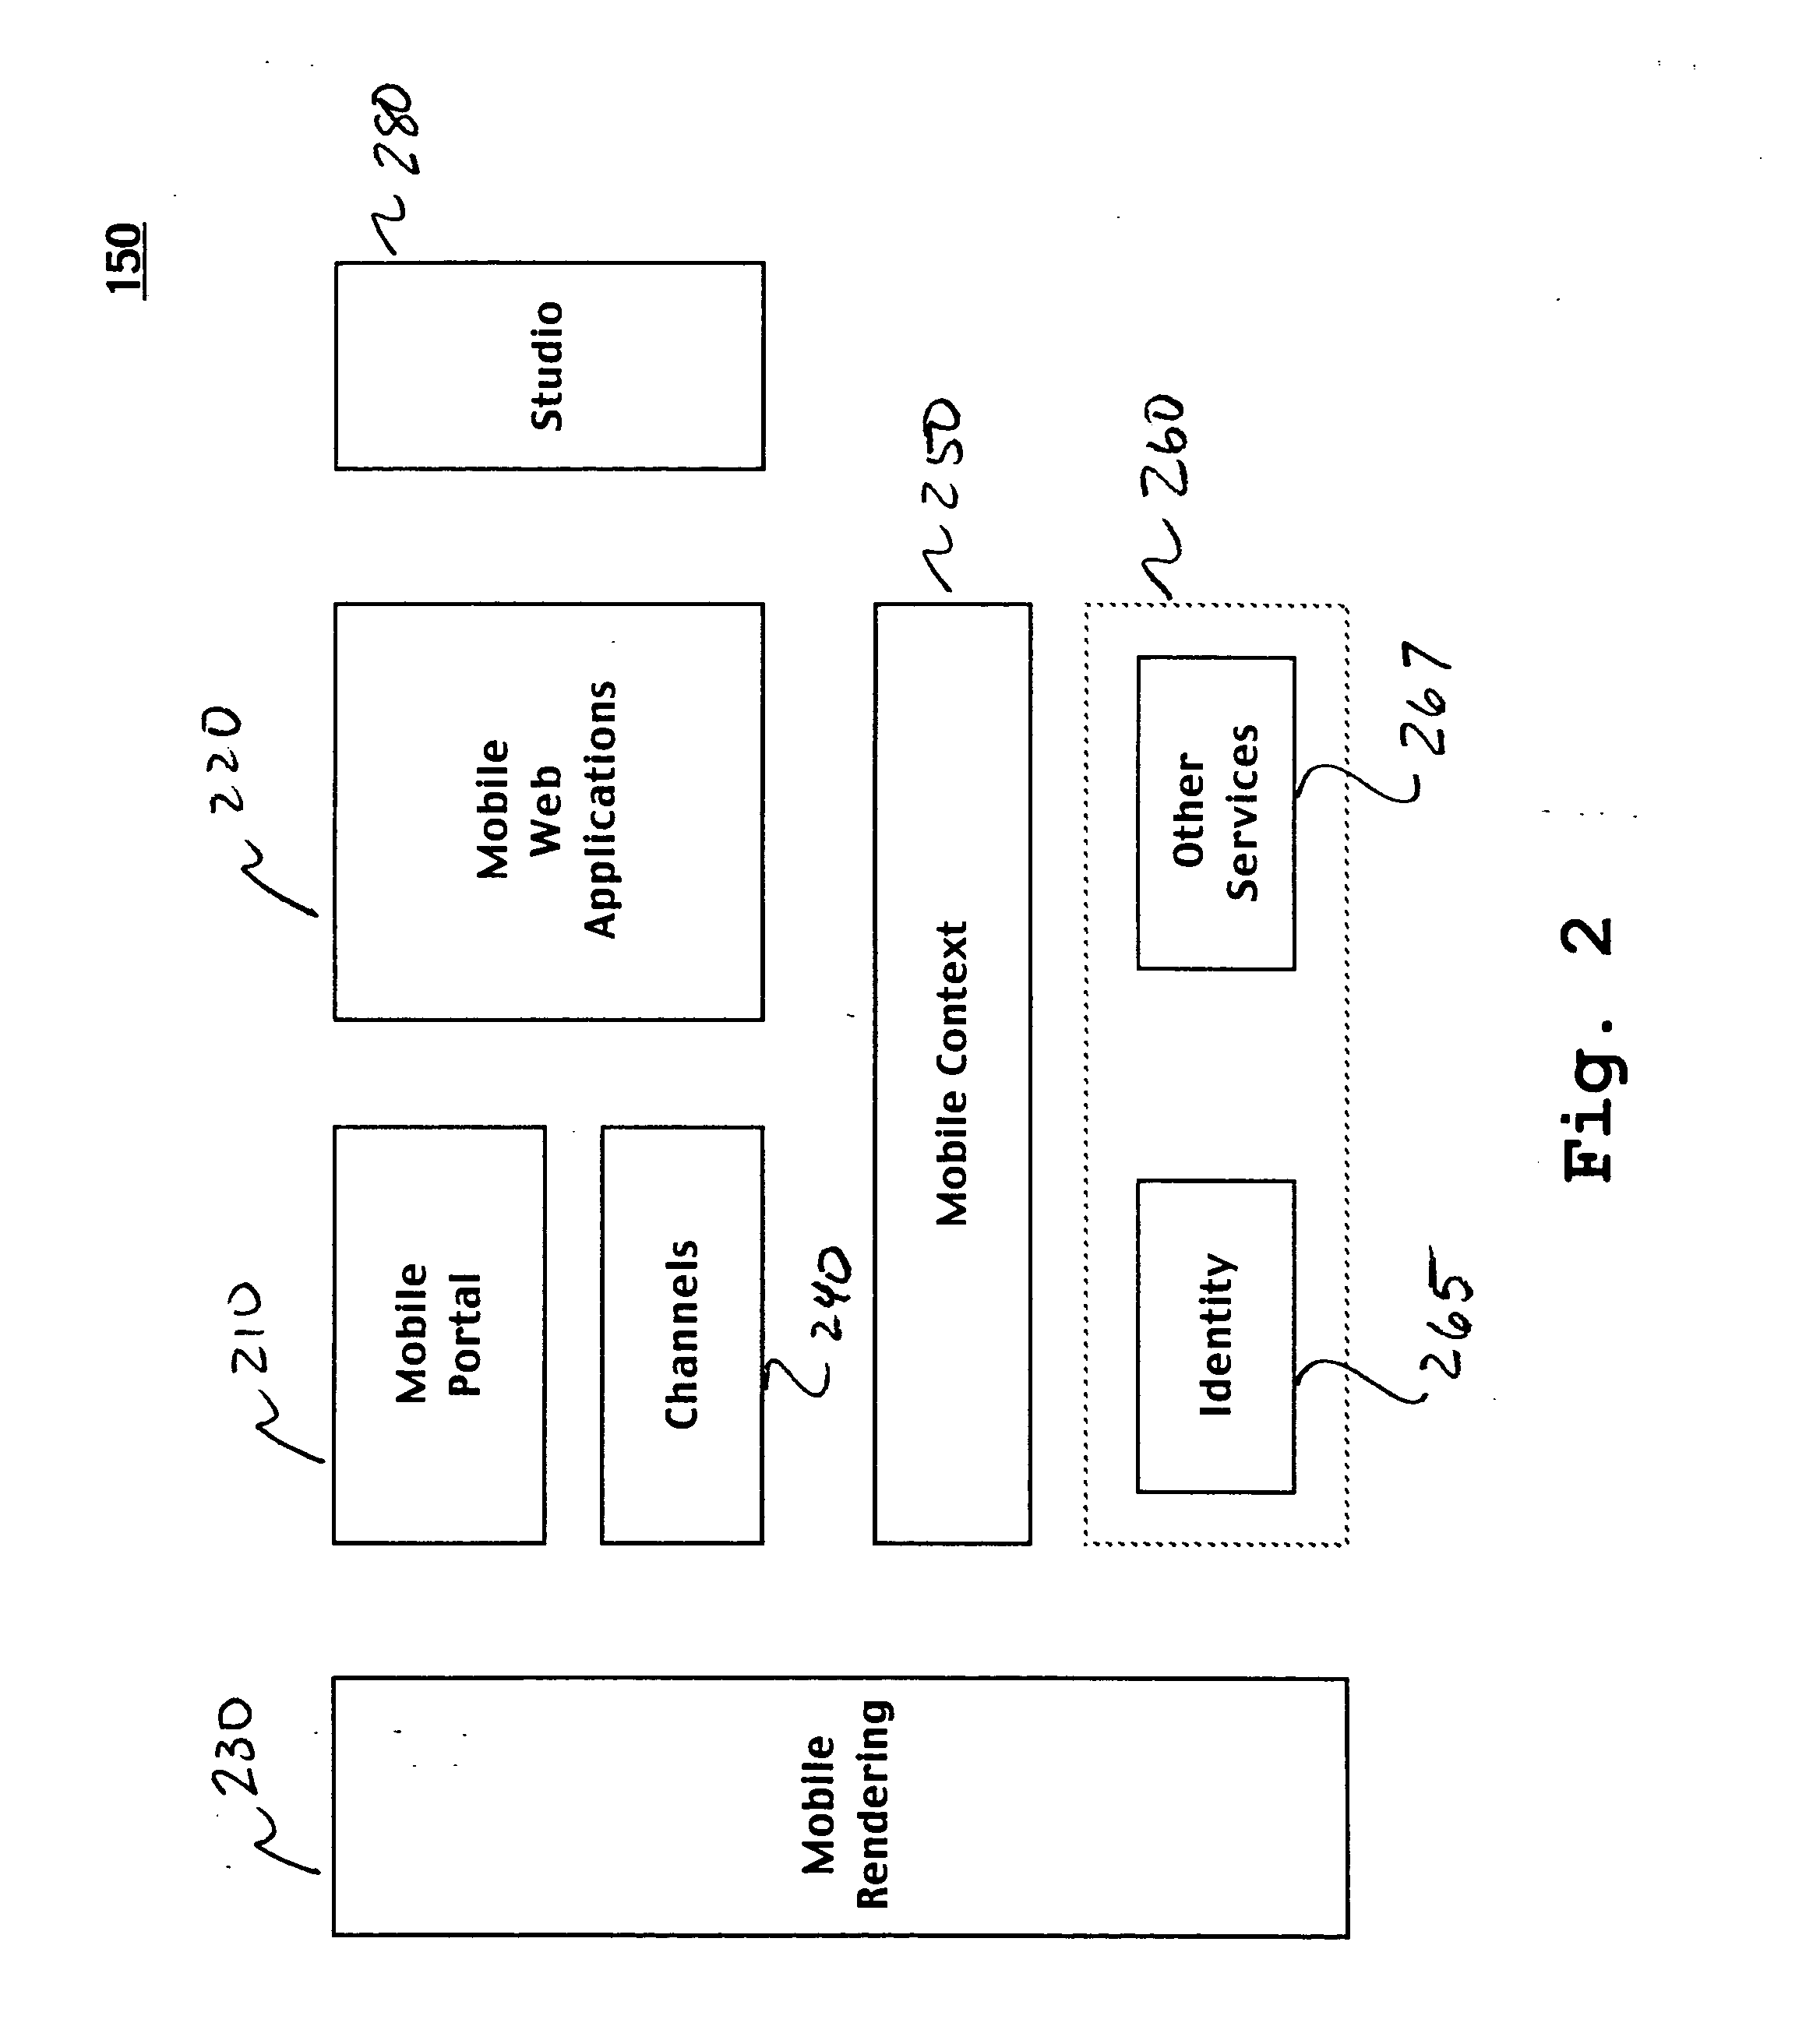 Method and system for storing and retrieving extensible multi-dimensional display property configurations